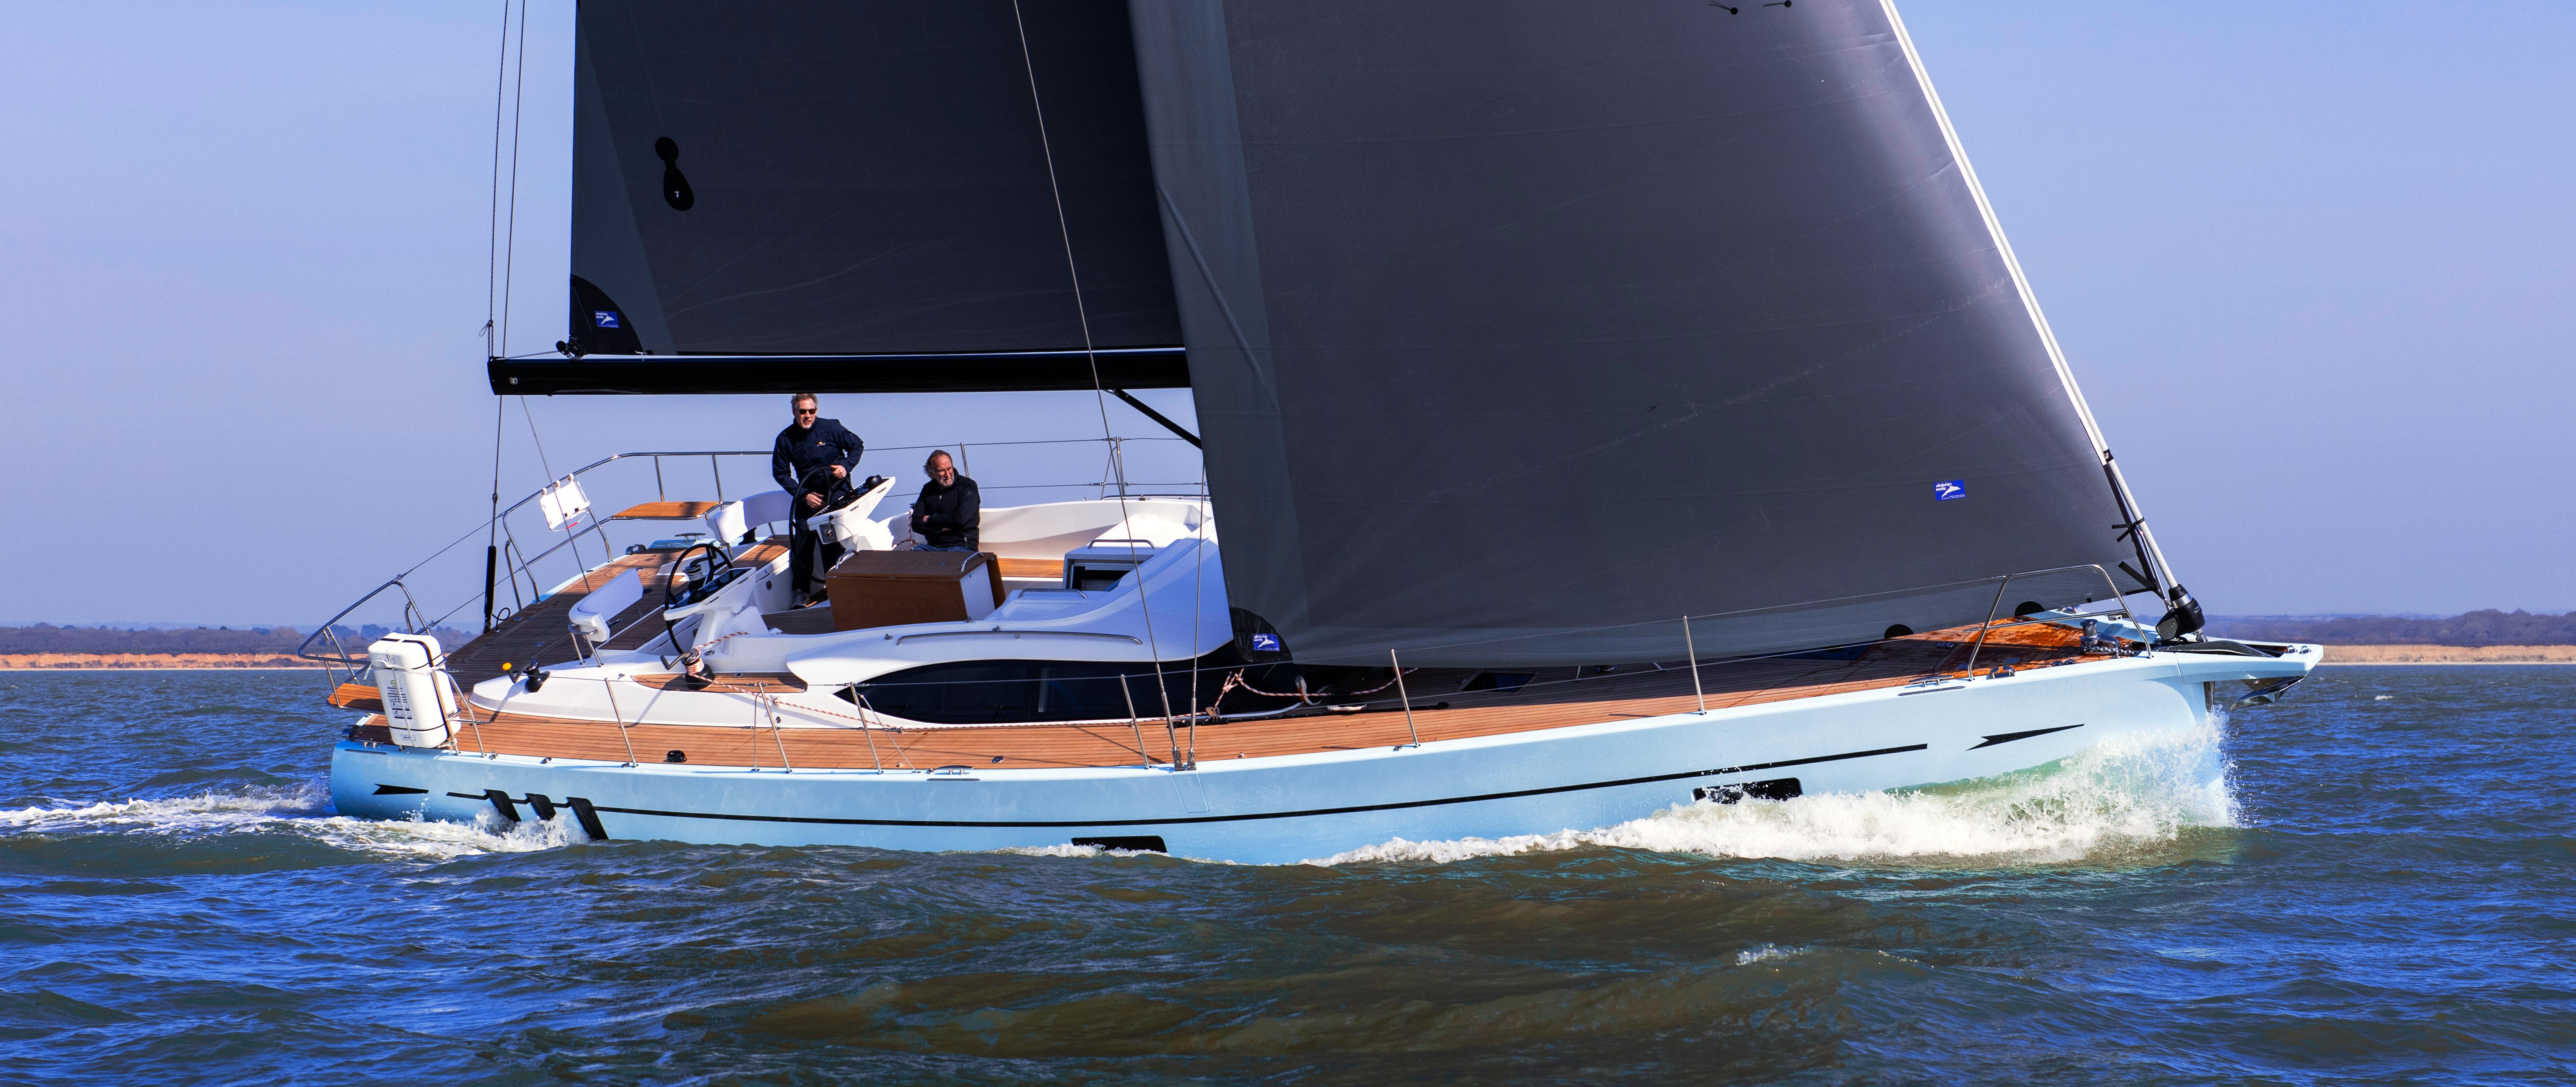 50 ft sailing yacht for sale uk